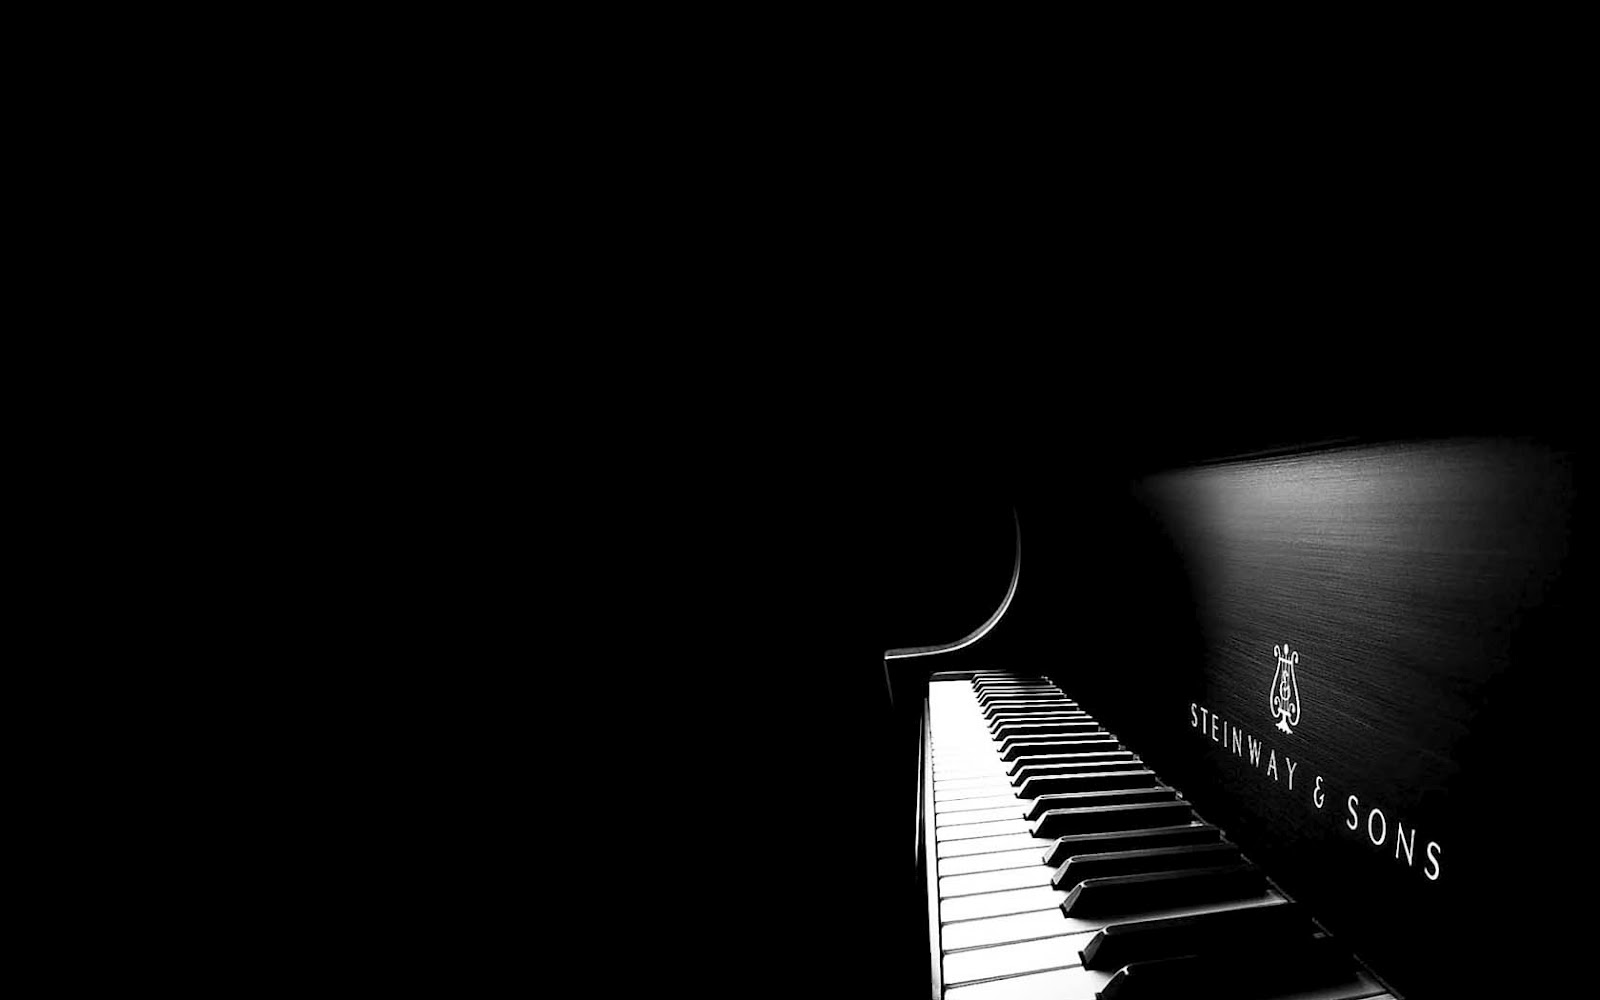 Piano Photos HD Music Wallpaper In For